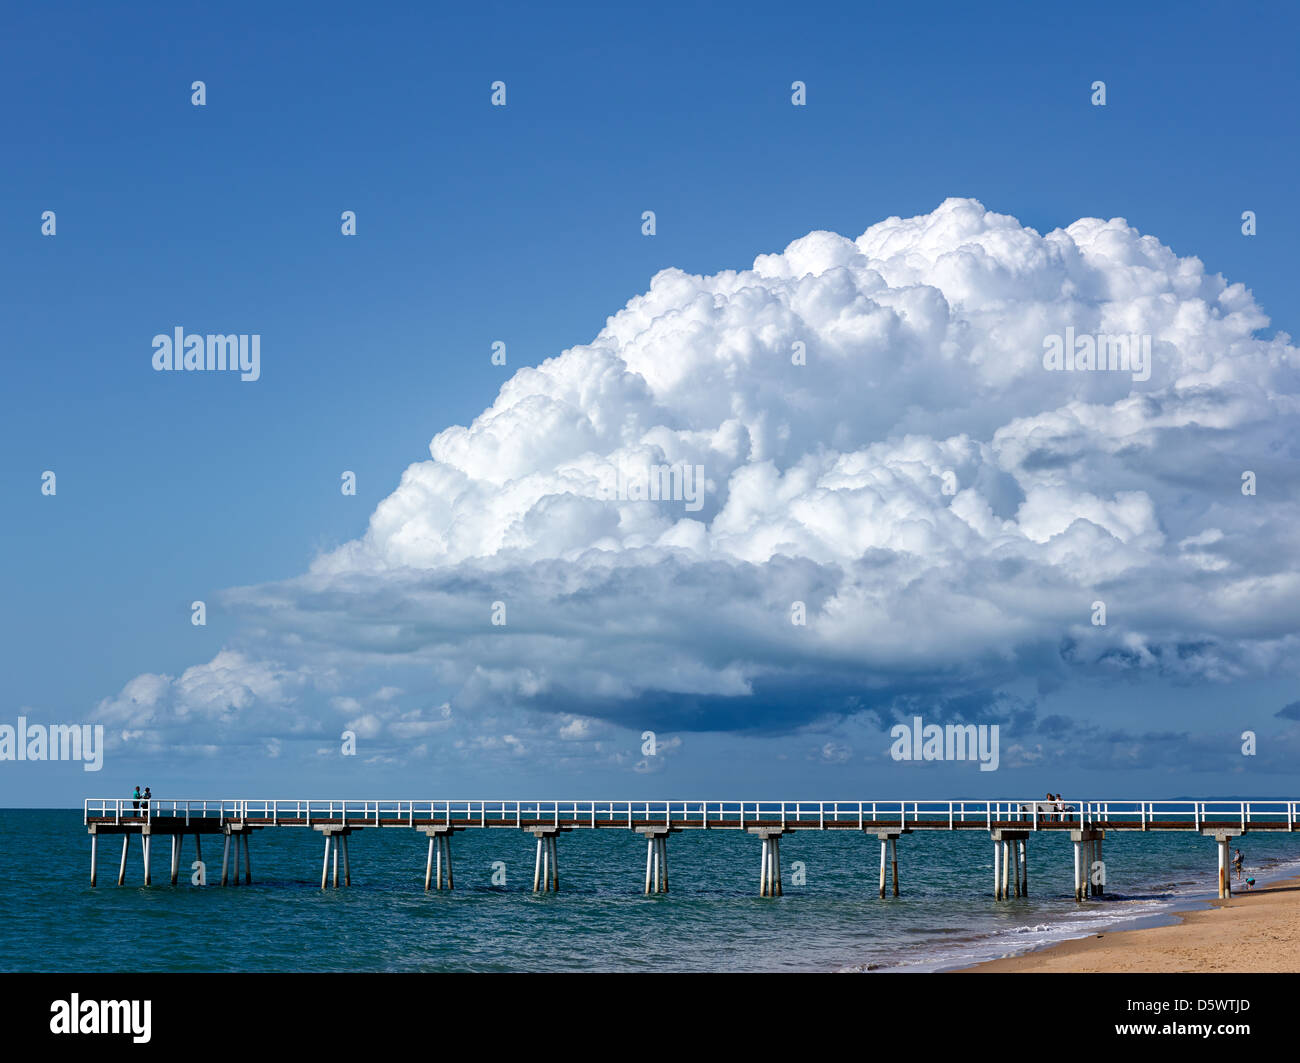 Storm clouds forming over the Coral Sea at Hervey Bay. Torquay Pier in foreground. Stock Photo